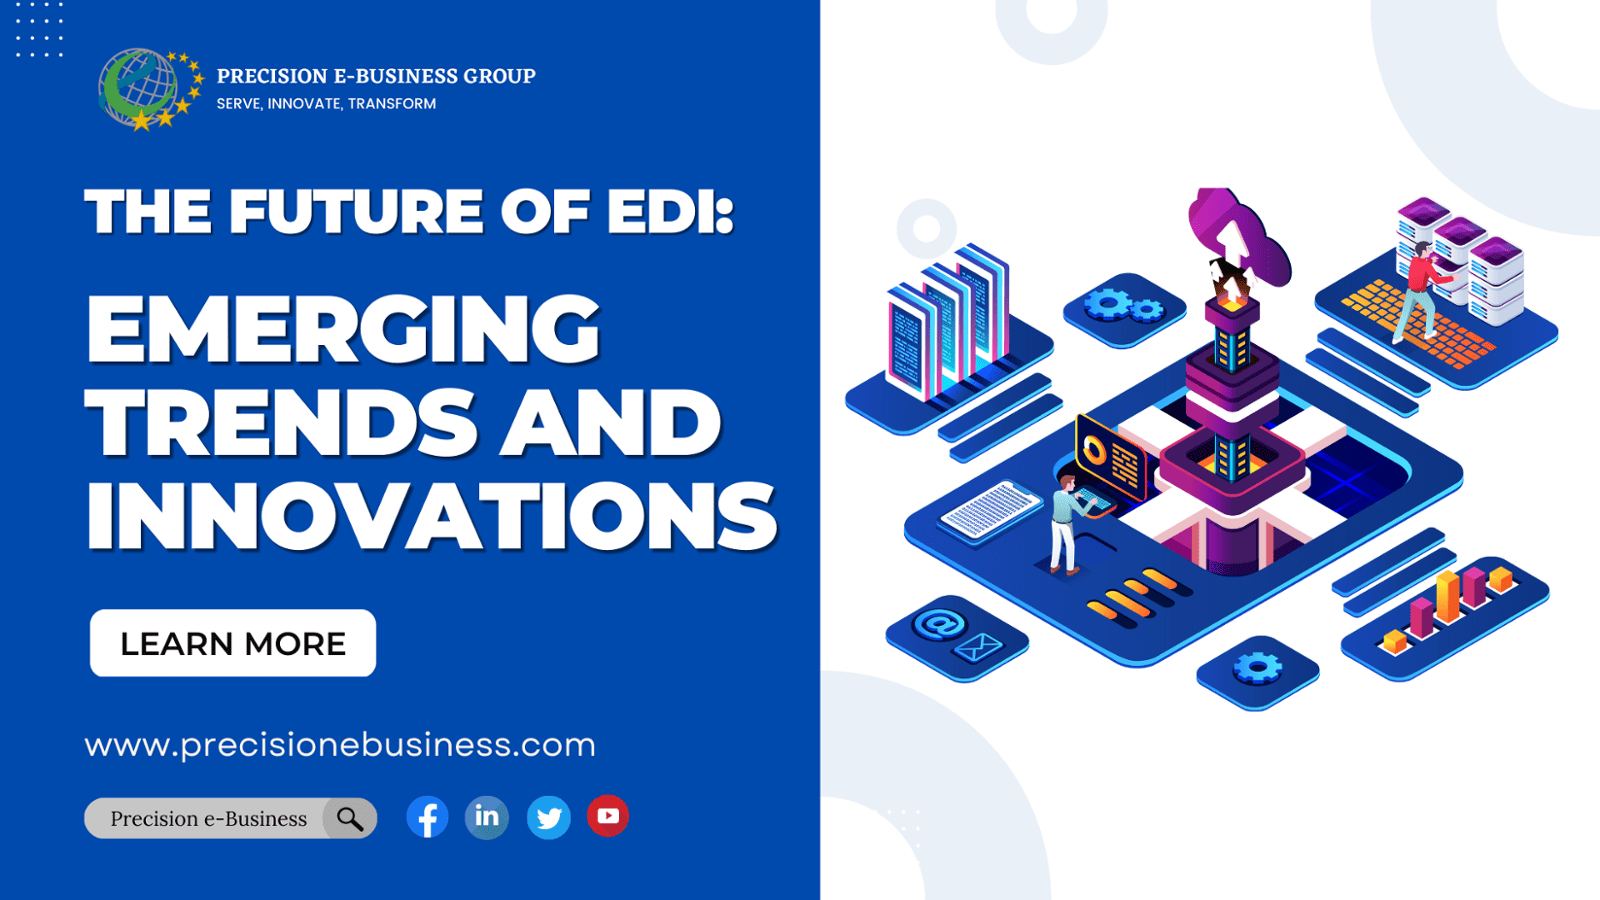 The Future of EDI: Emerging Trends and Innovations